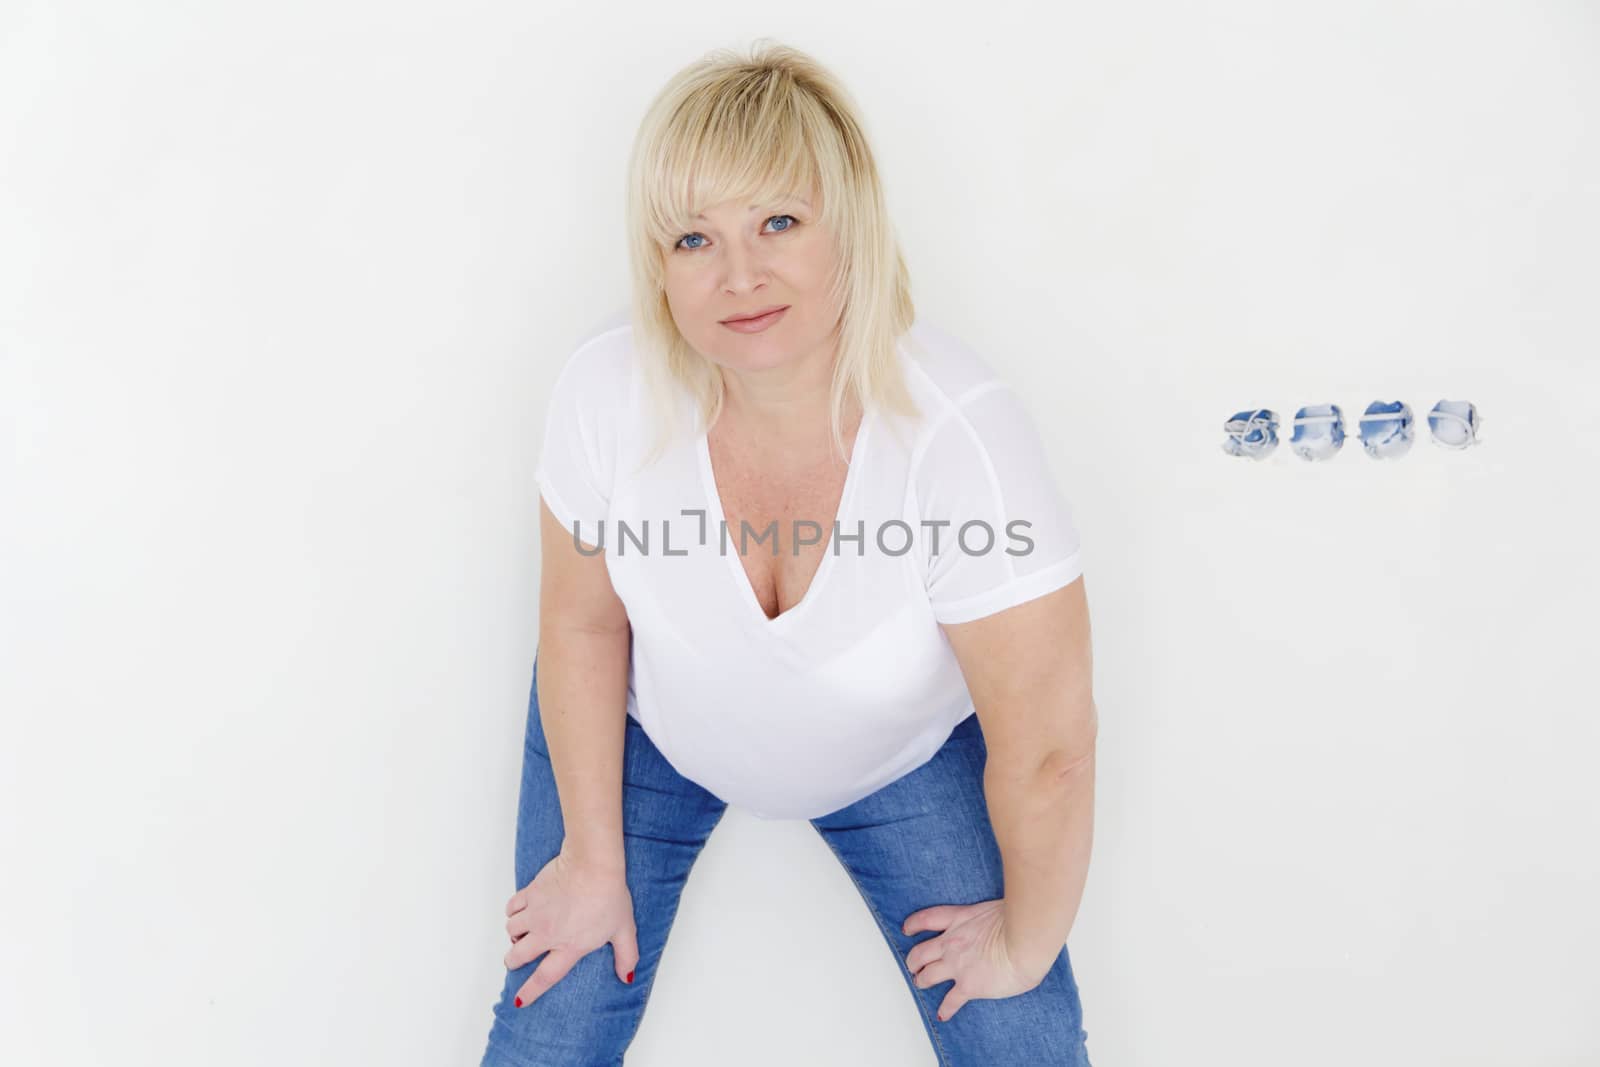 Blond woman in white and blue jeans inside empty room with opened wall plugs